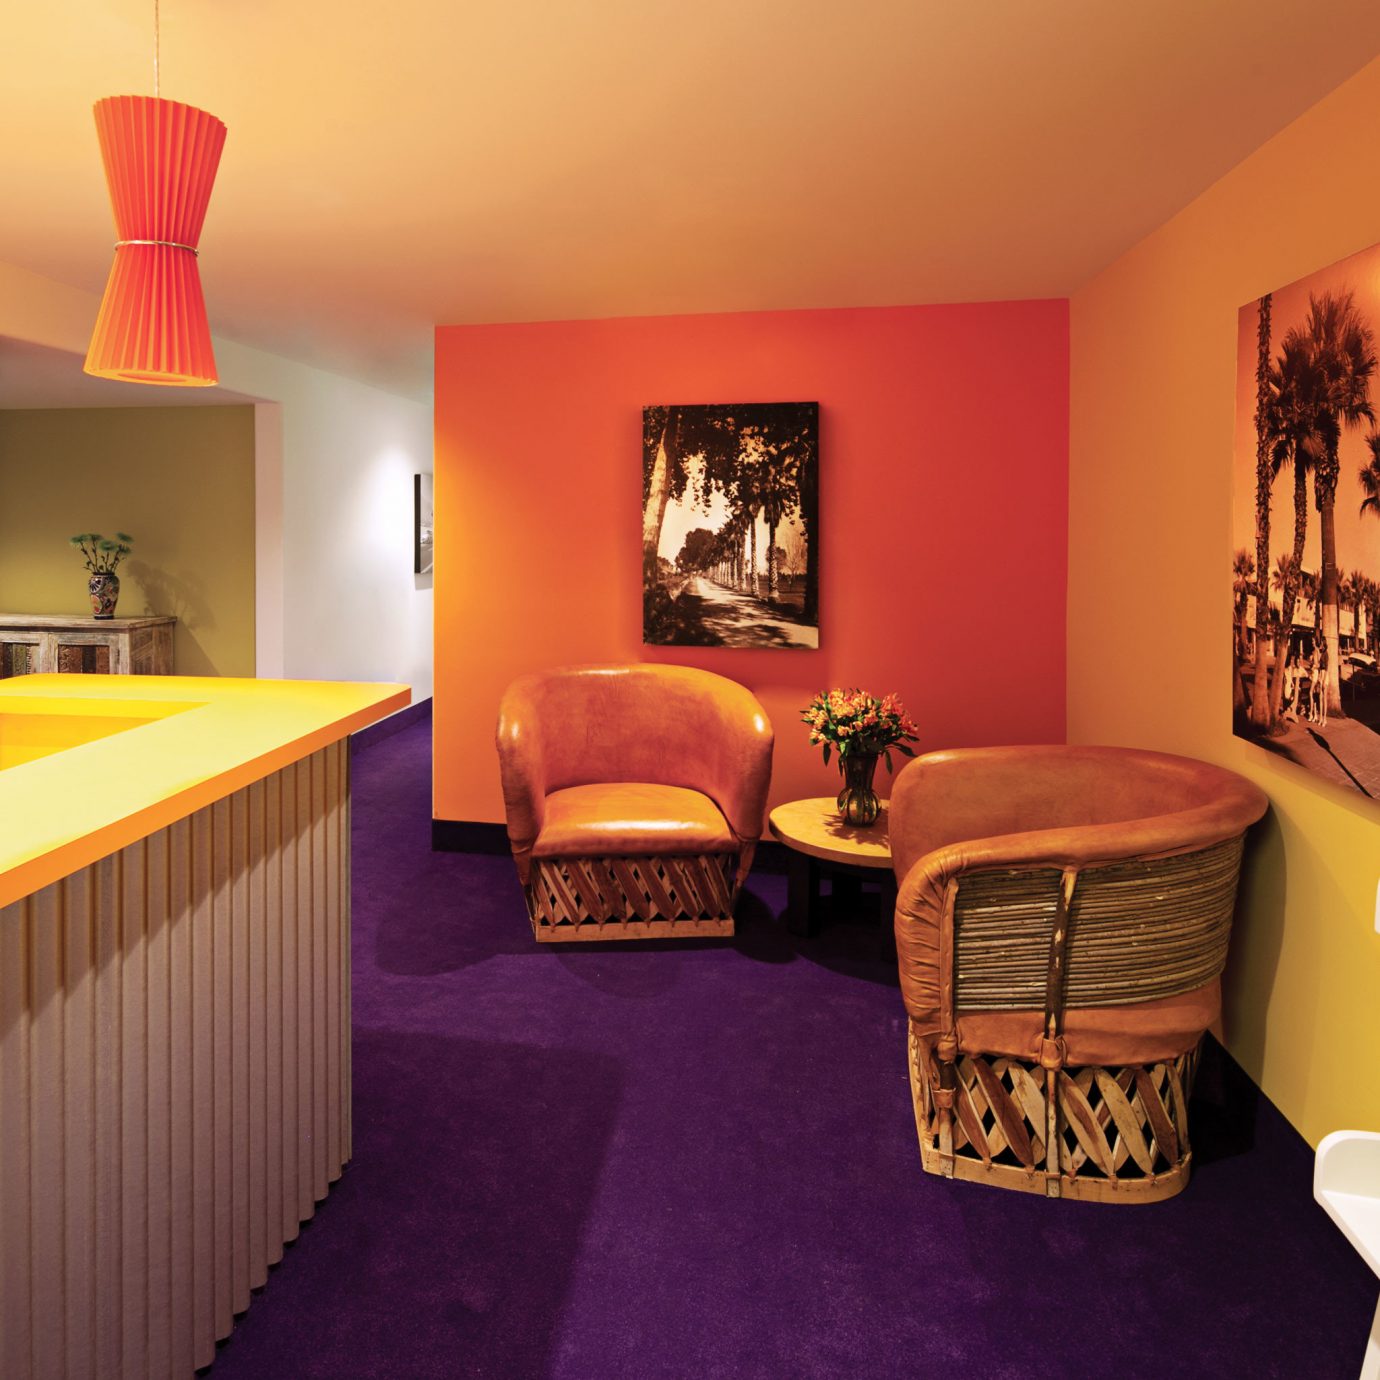 Bar Dining Drink Eat Hip Lobby Lounge Modern Play property cottage home Suite orange Bedroom colored